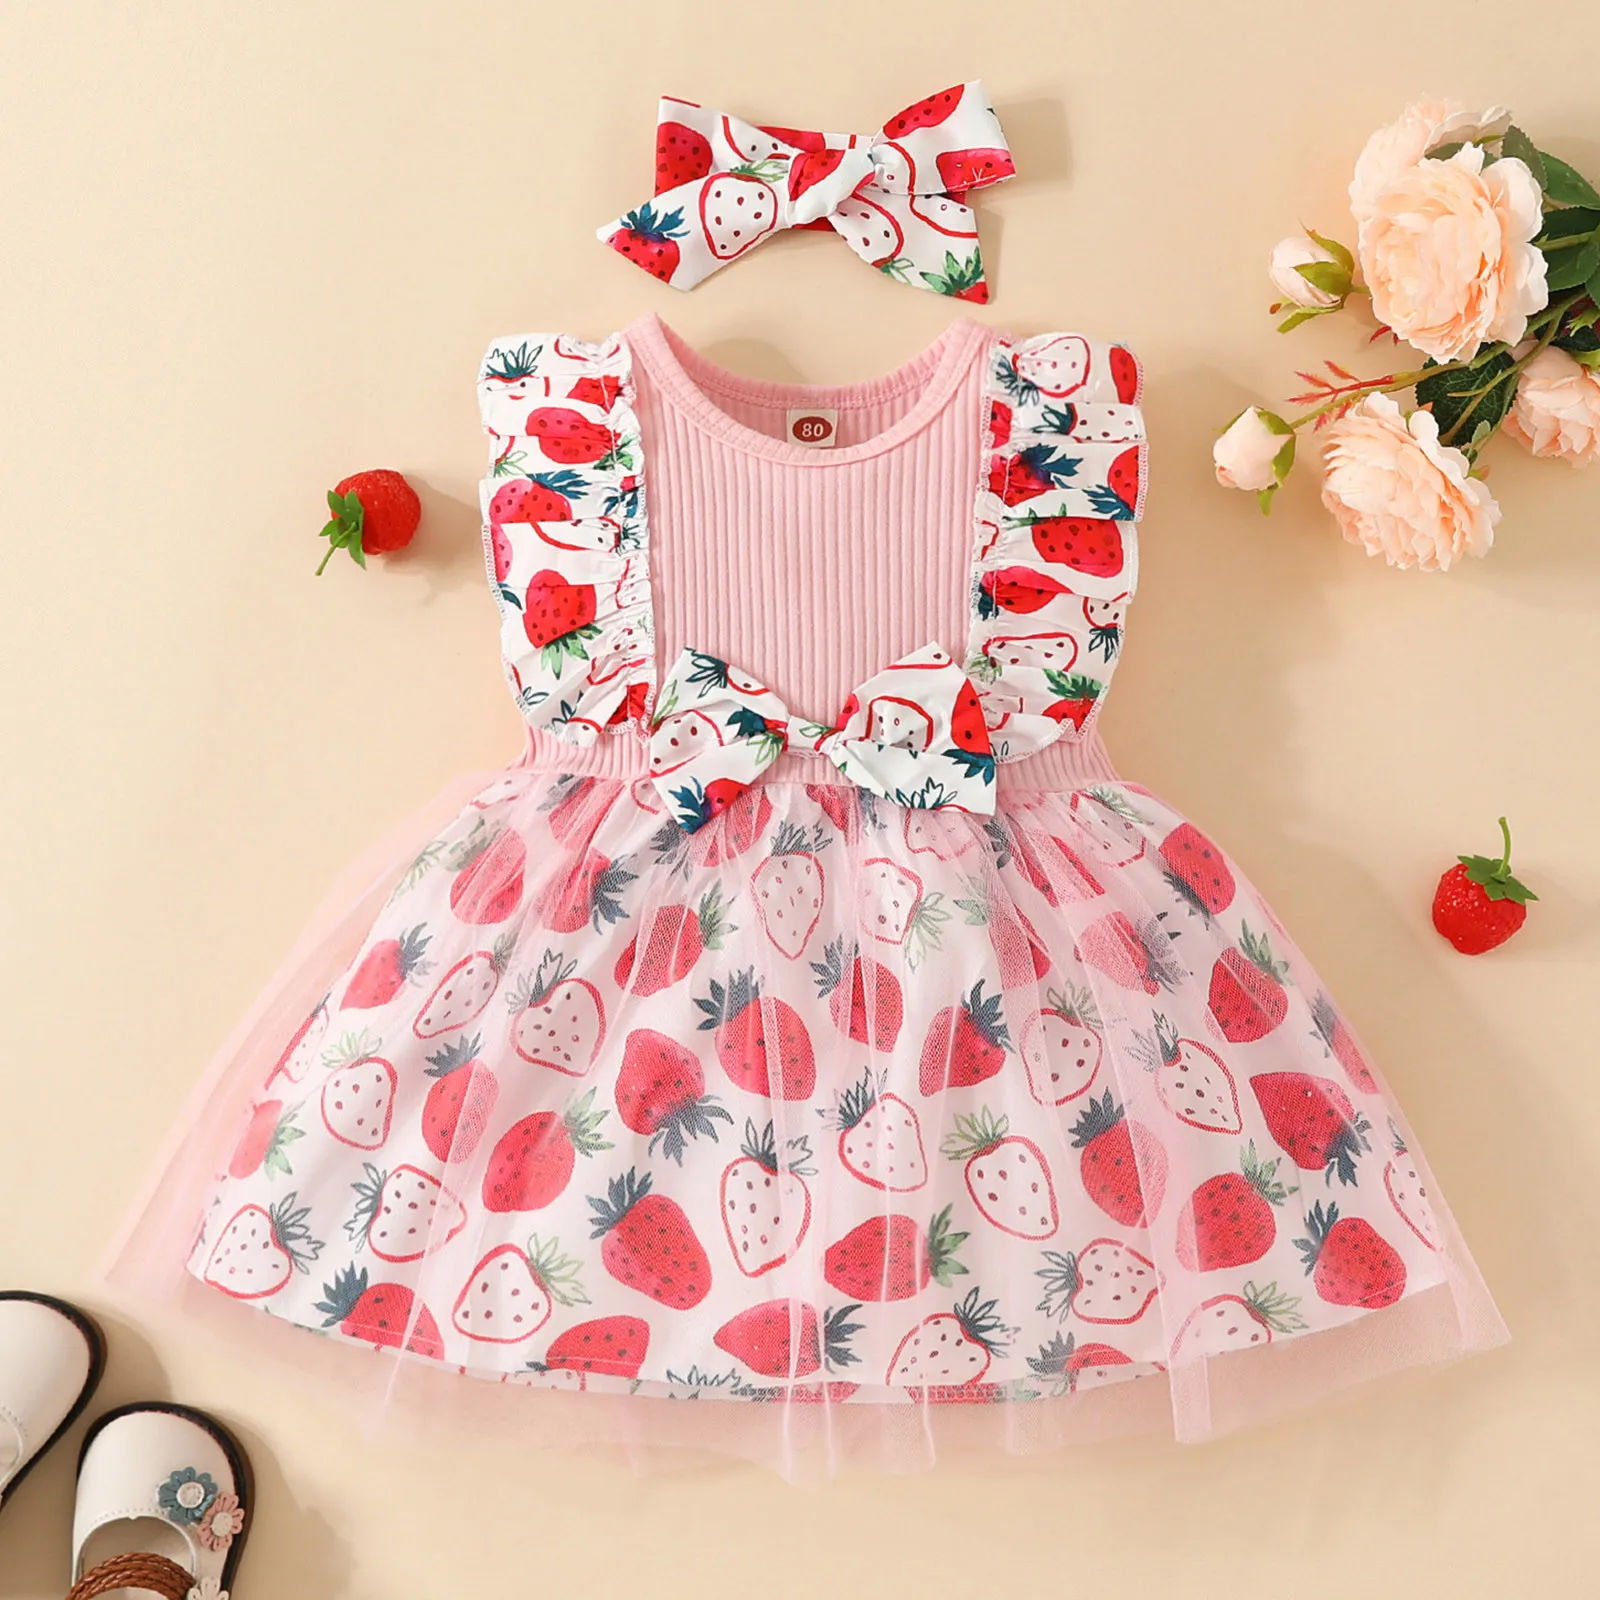 

Sweet Baby Strawberry Dresses For Girls Fly Sleeve Lace Tulle Dress Newborn Princess Party Dress Summer Baby Clothing 0-3Y